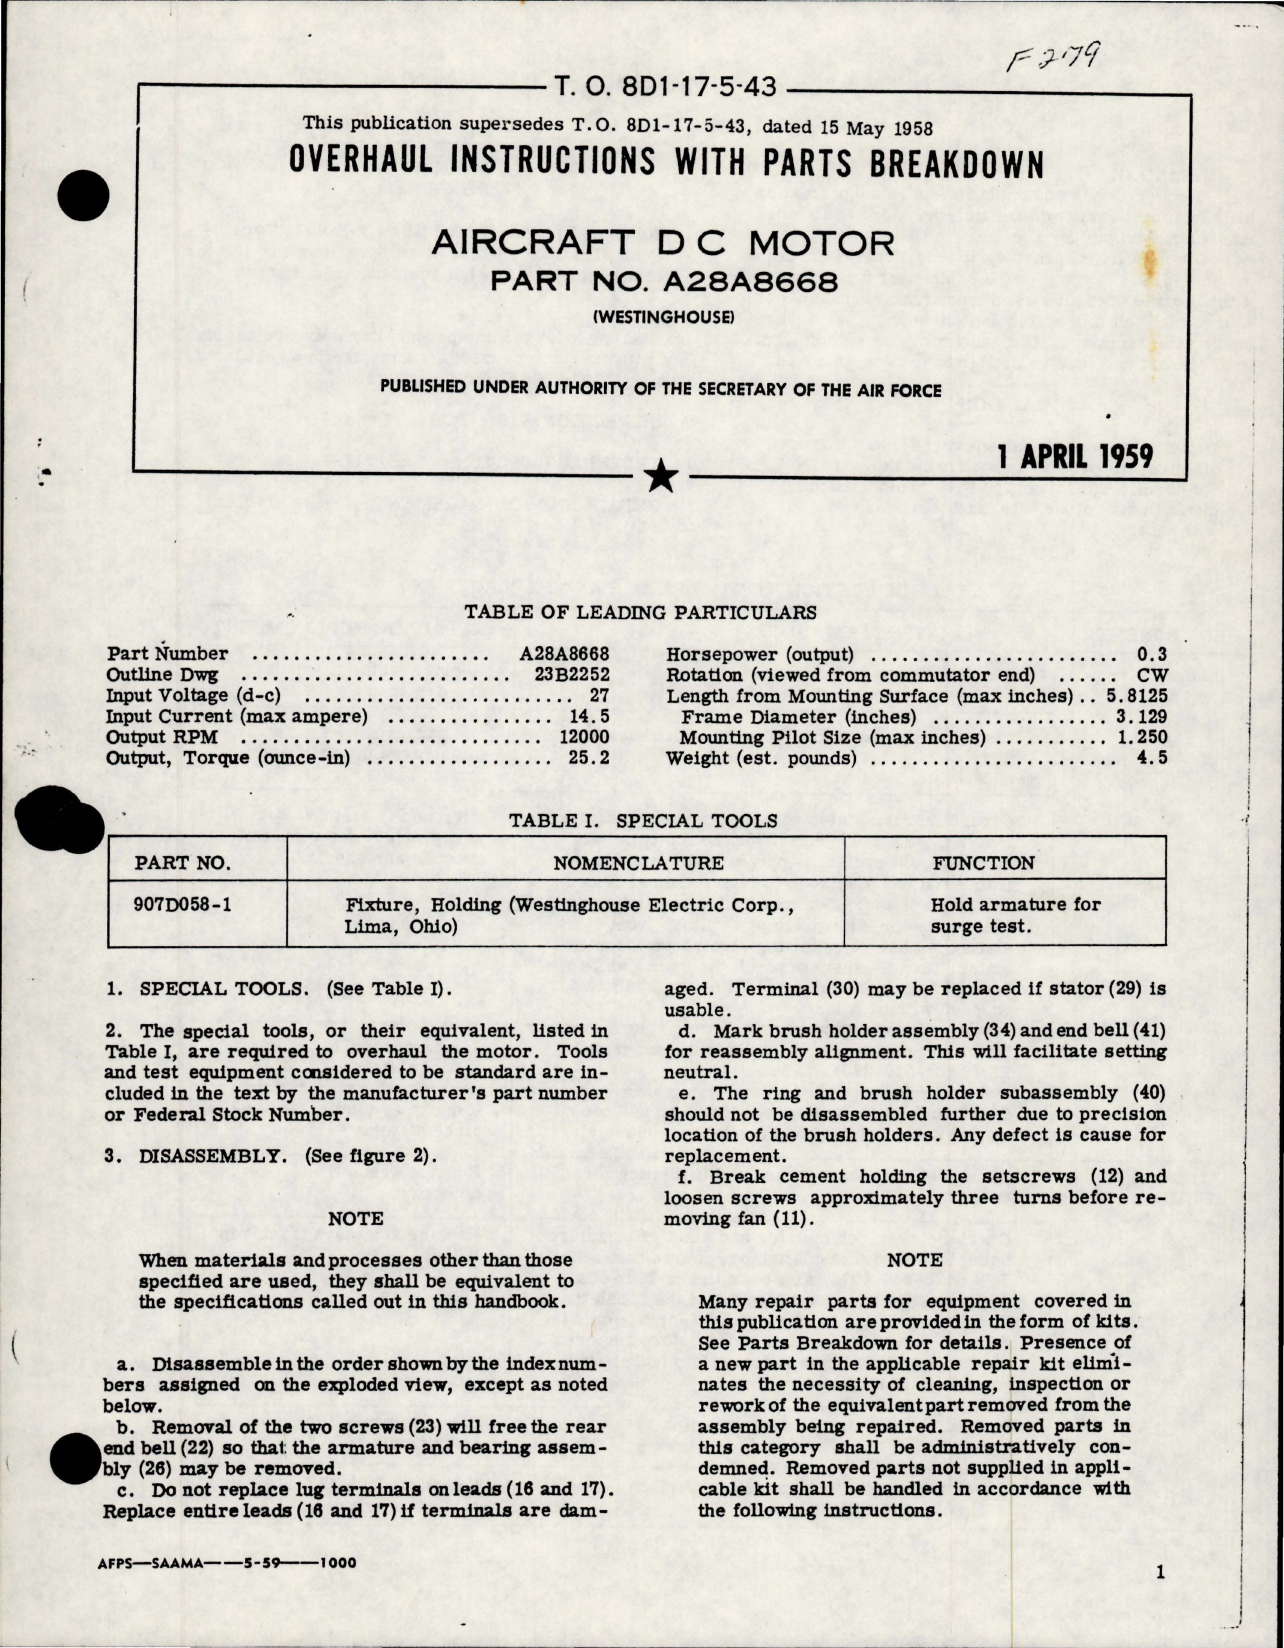 Sample page 1 from AirCorps Library document: Overhaul Instructions with Parts for DC Motor - Part A28A8668 